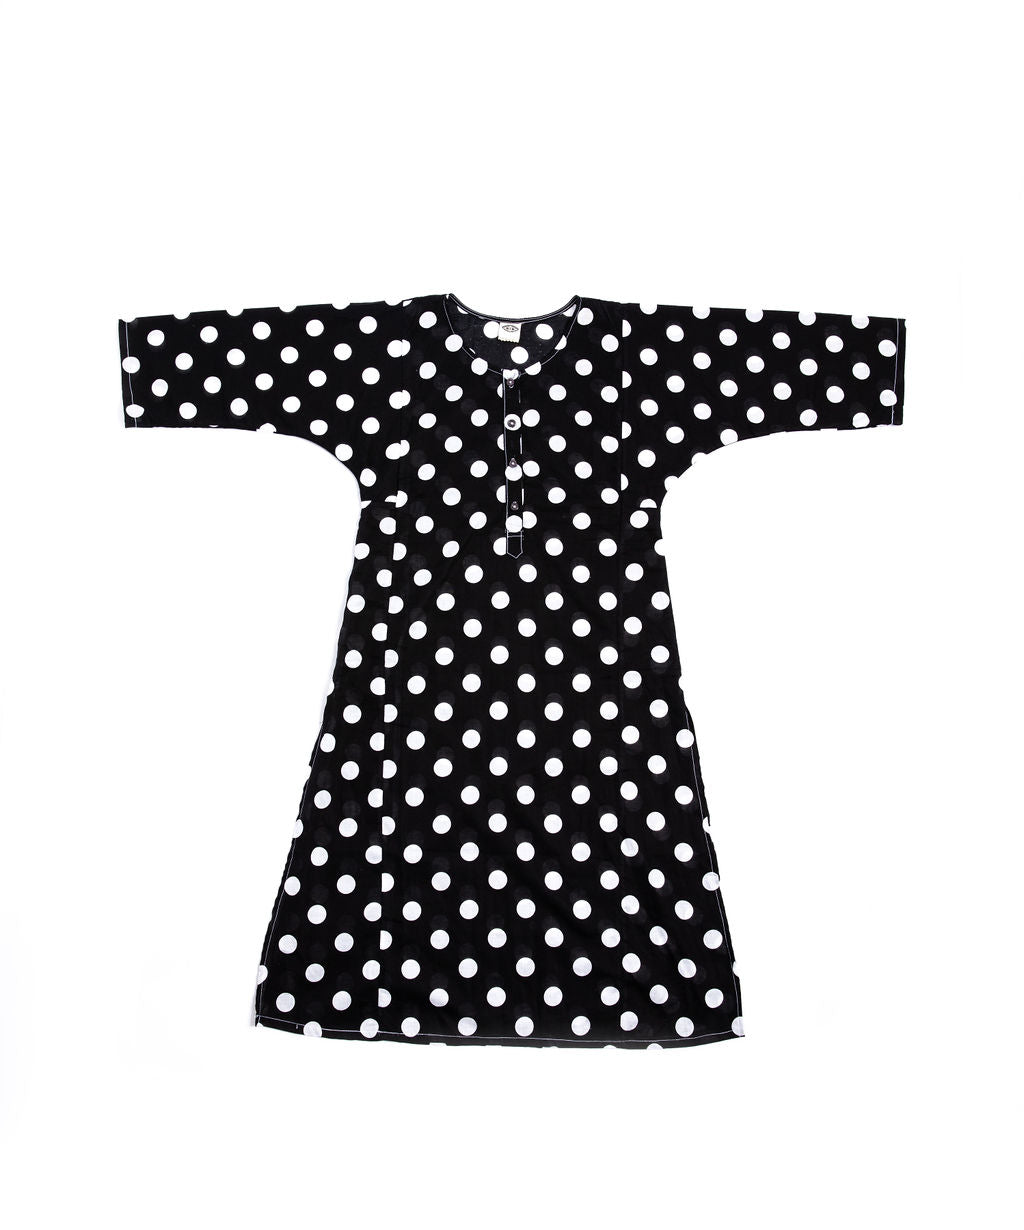 Beach Tunic in Polka Dot - The Beach Tunic is the epitome of easy-breezy with a healthy dash of bold pattern. Extra structure under the arms and side slits up to the hip give you room to run for the surf and stretch for the sun.